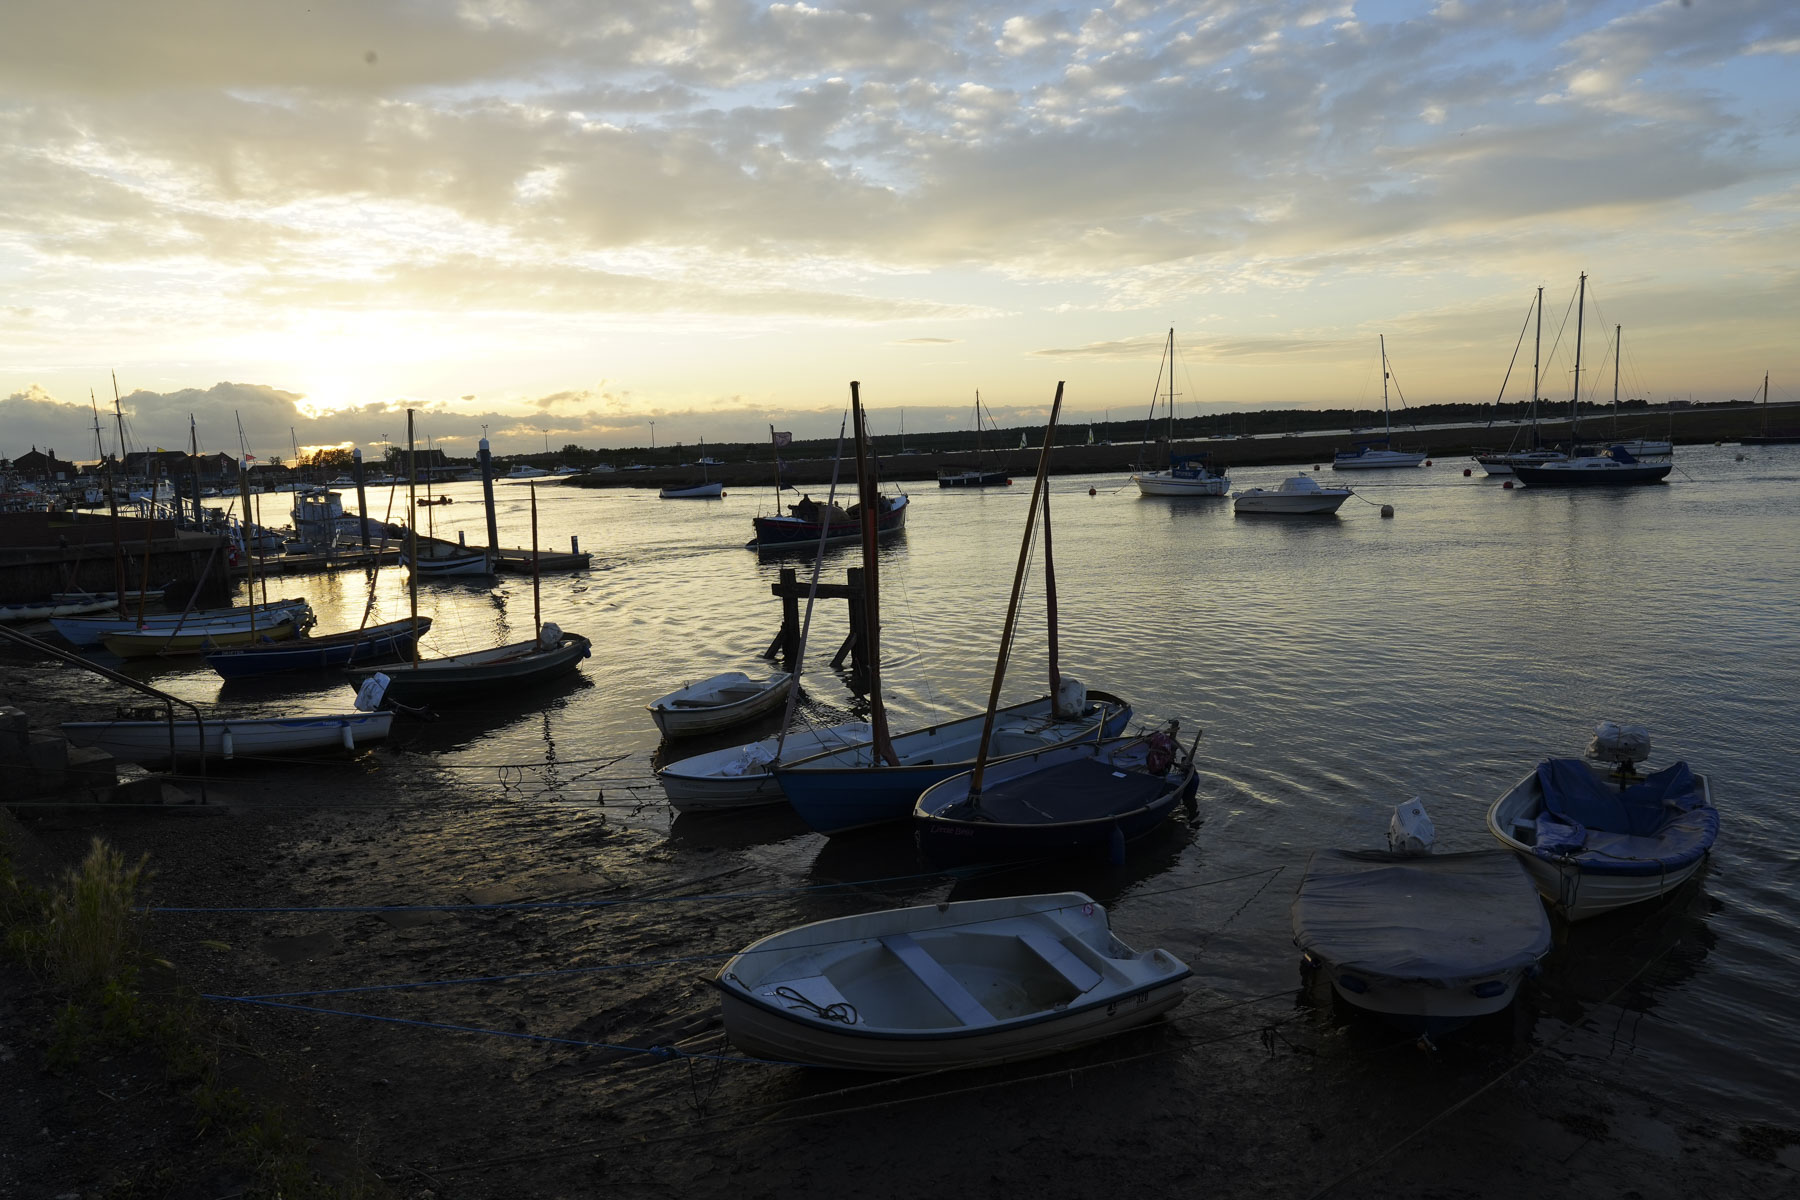 boats on the water at last light, captured with the Sony A7C II full-frame mirrorless camera